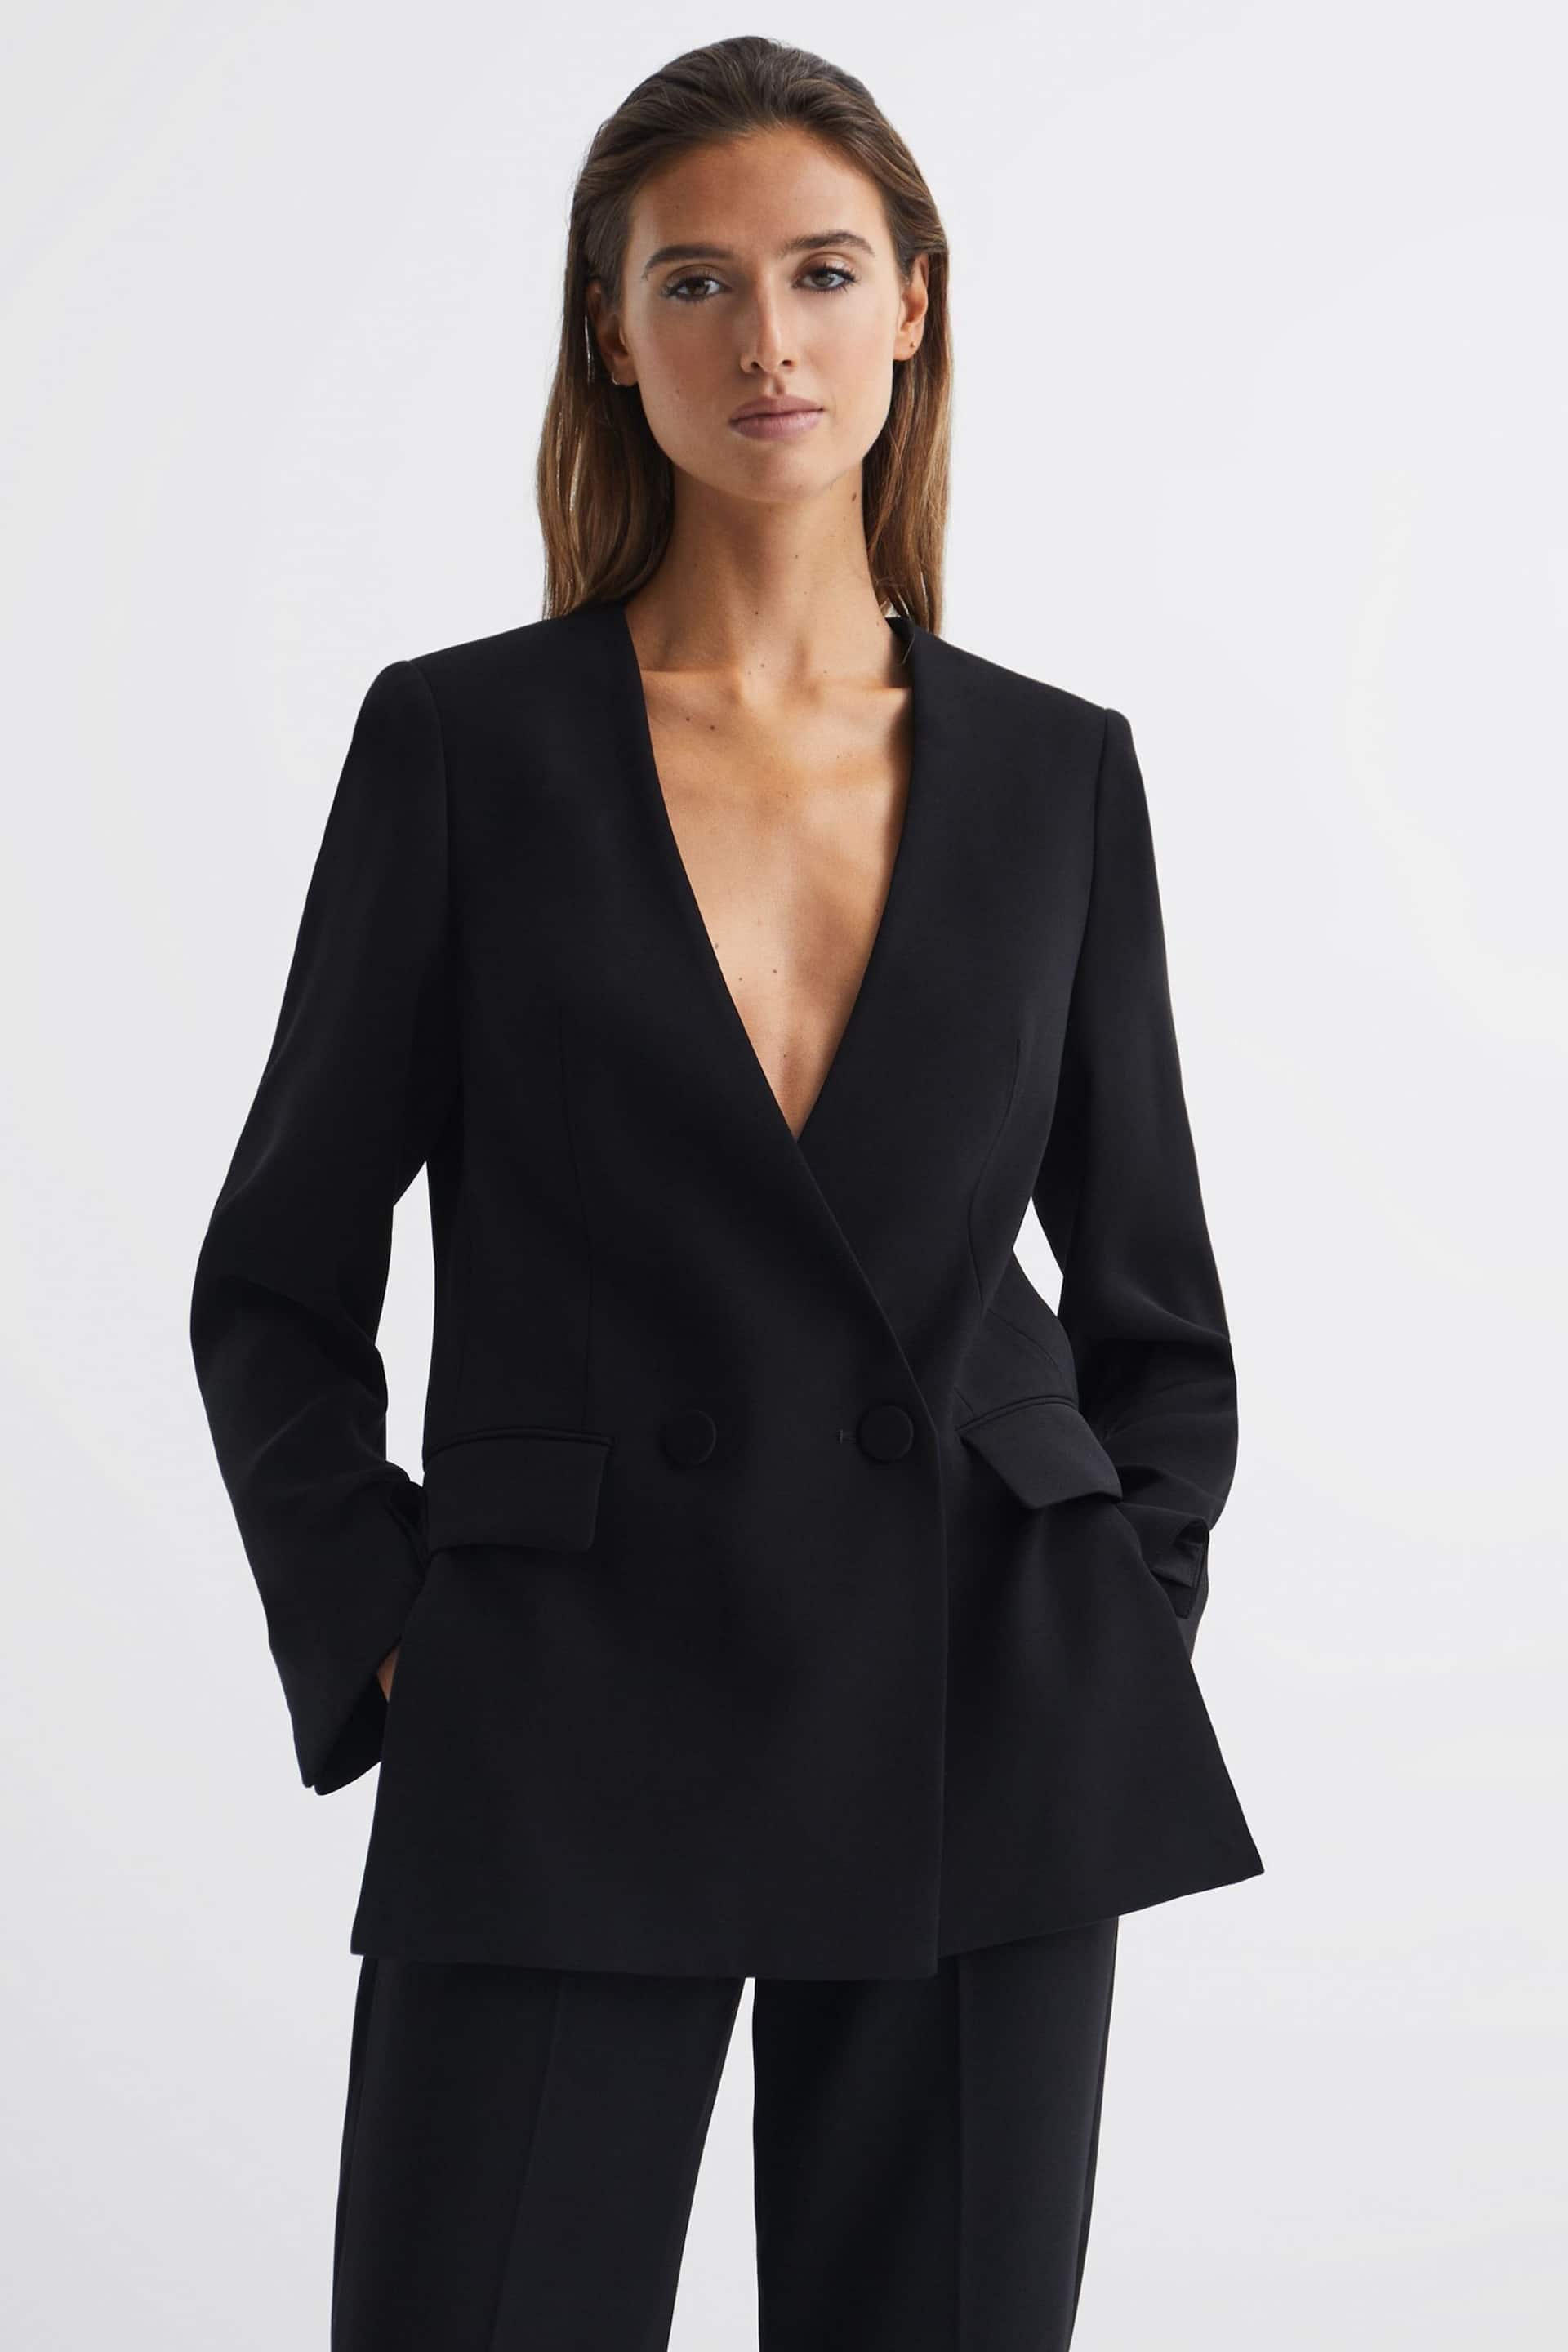 Reiss Black Margeaux Collarless Double Breasted Suit Blazer - Image 1 of 7